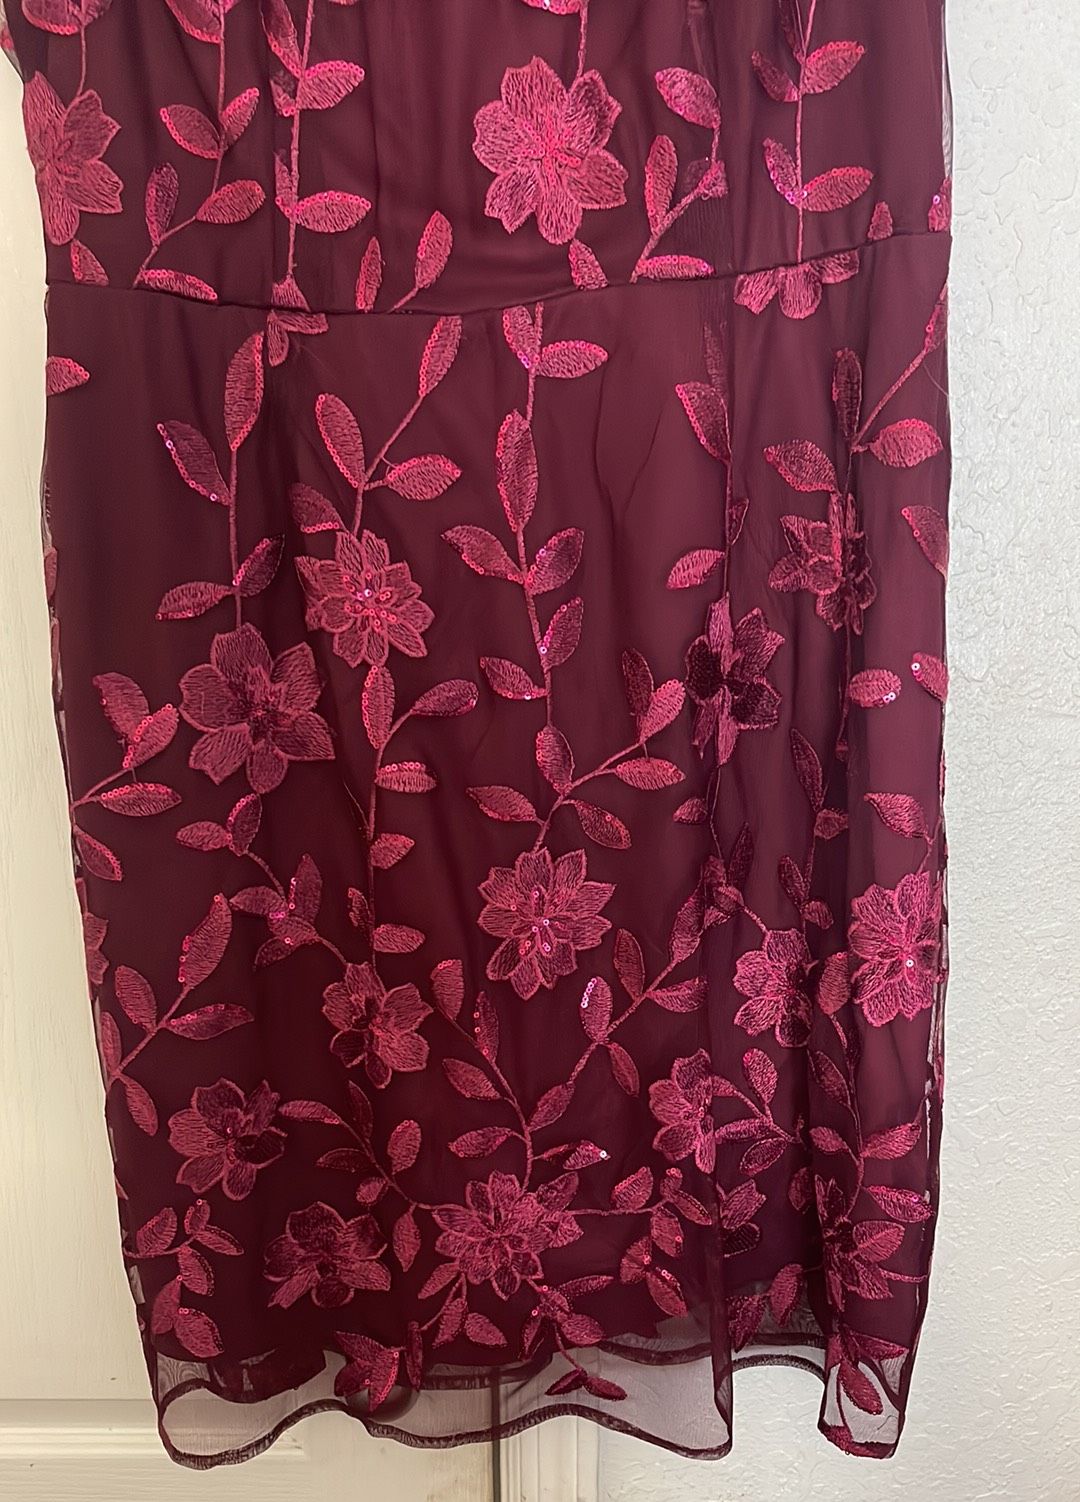 Plus Size 16 Red Cocktail Dress on Queenly